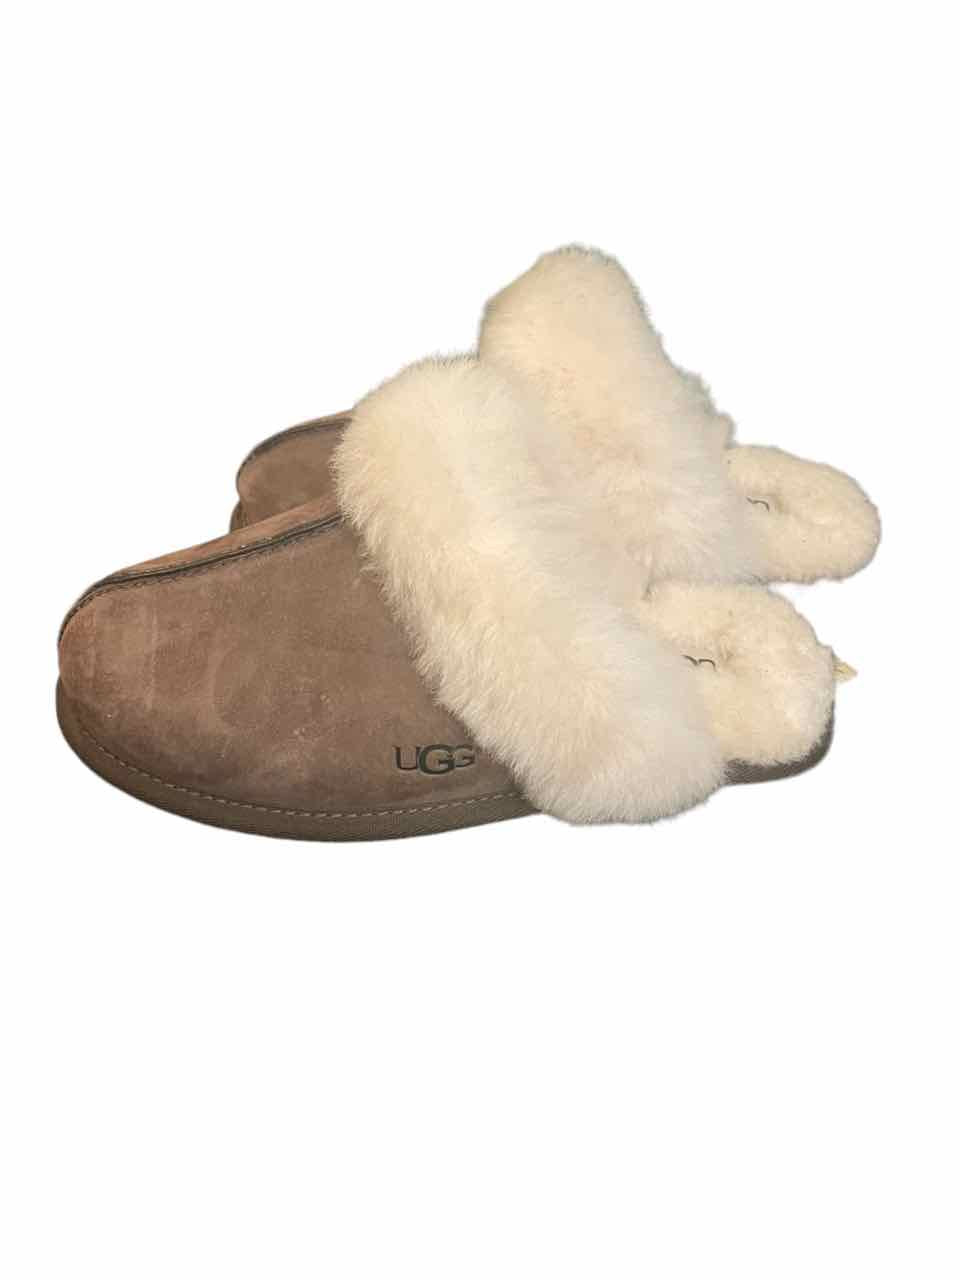 UGG Size 5 Brown Suede Slippers